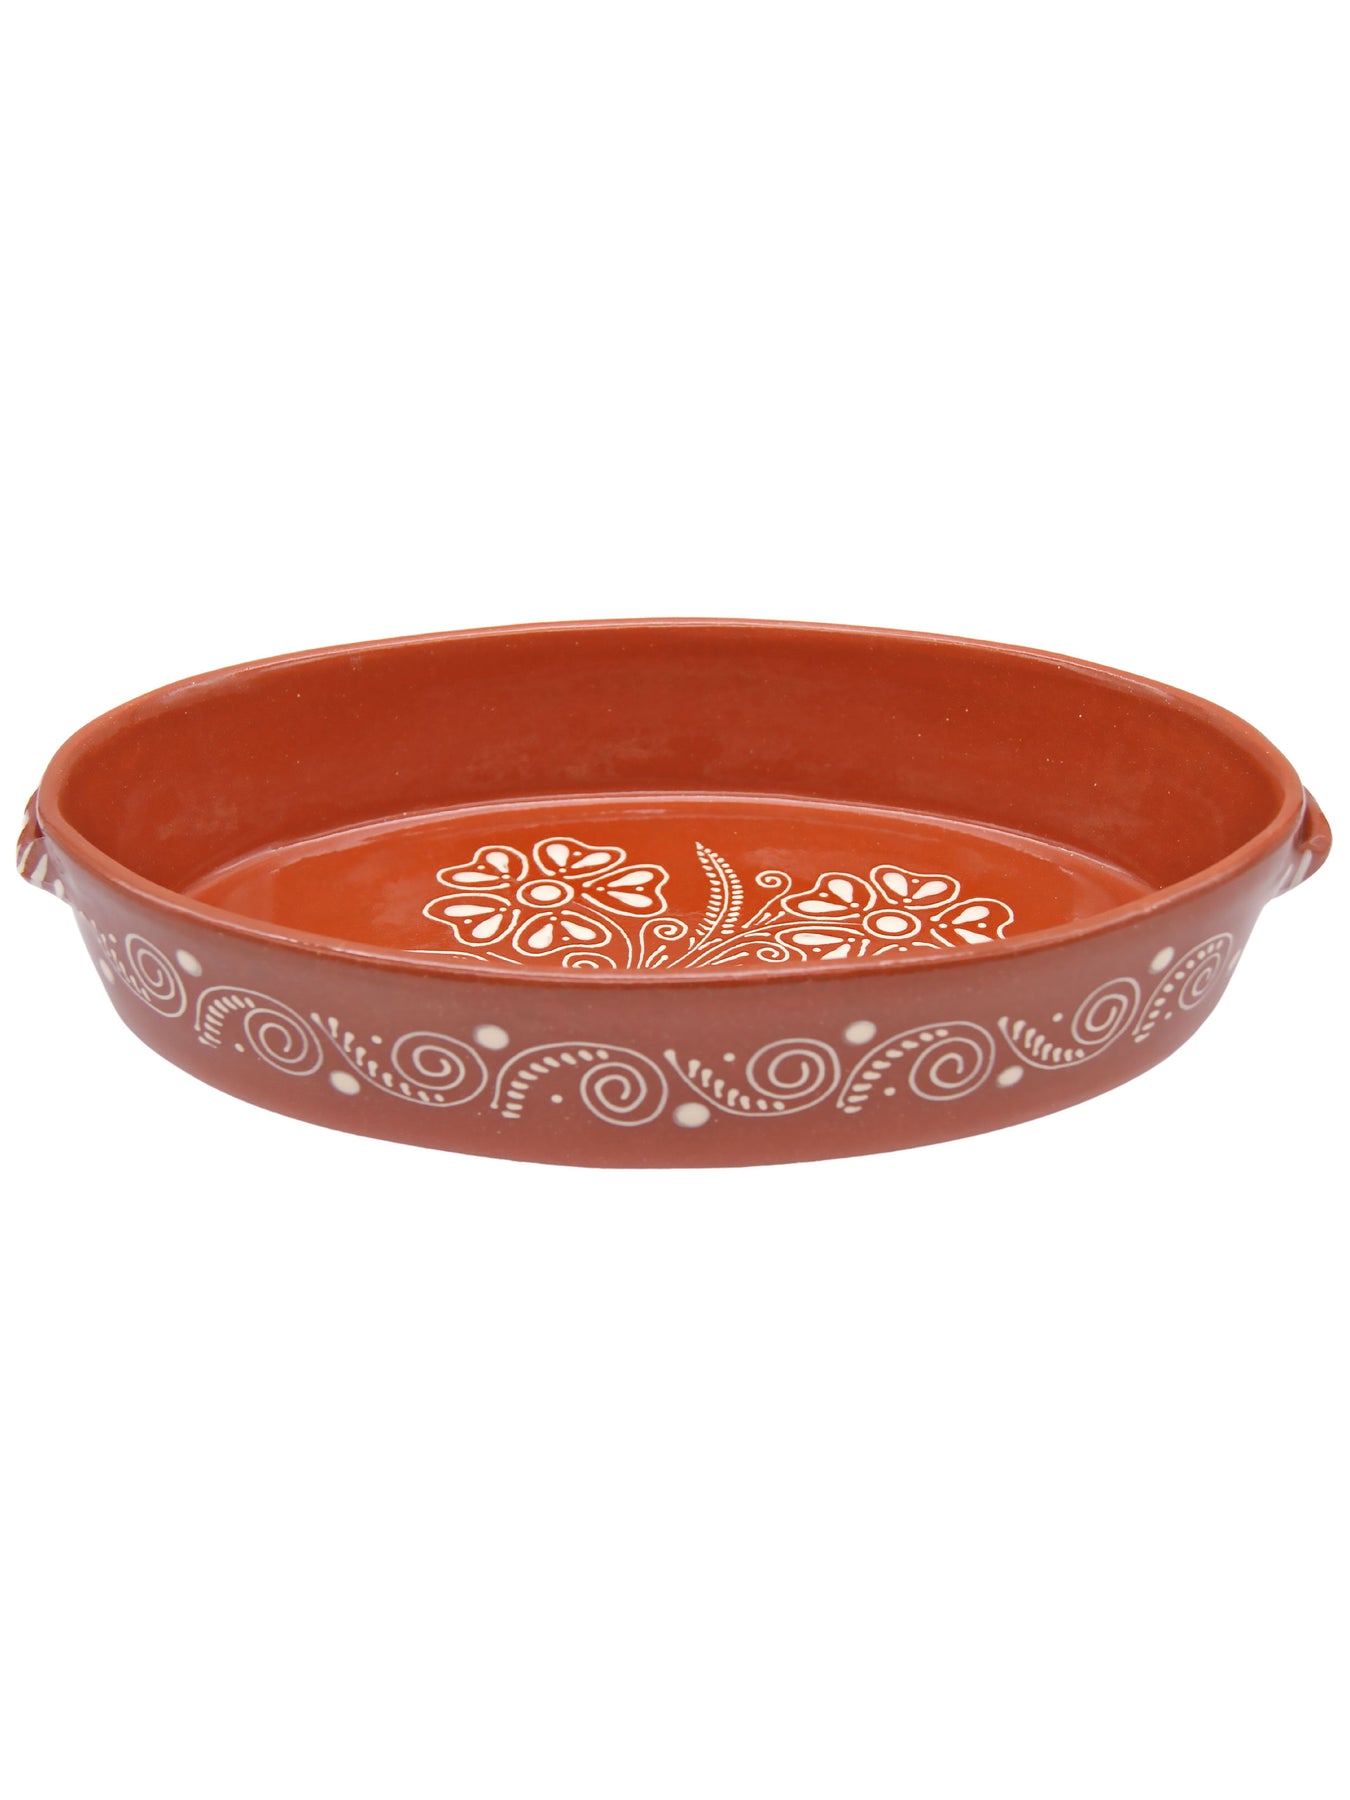 Handmade Oval Clay Pan Set of 2, Terracotta Pots for Cooking Fishes, Meat,  Vegetables, Traditional Earthenware Portuguese Pottery Cookware, Glazed